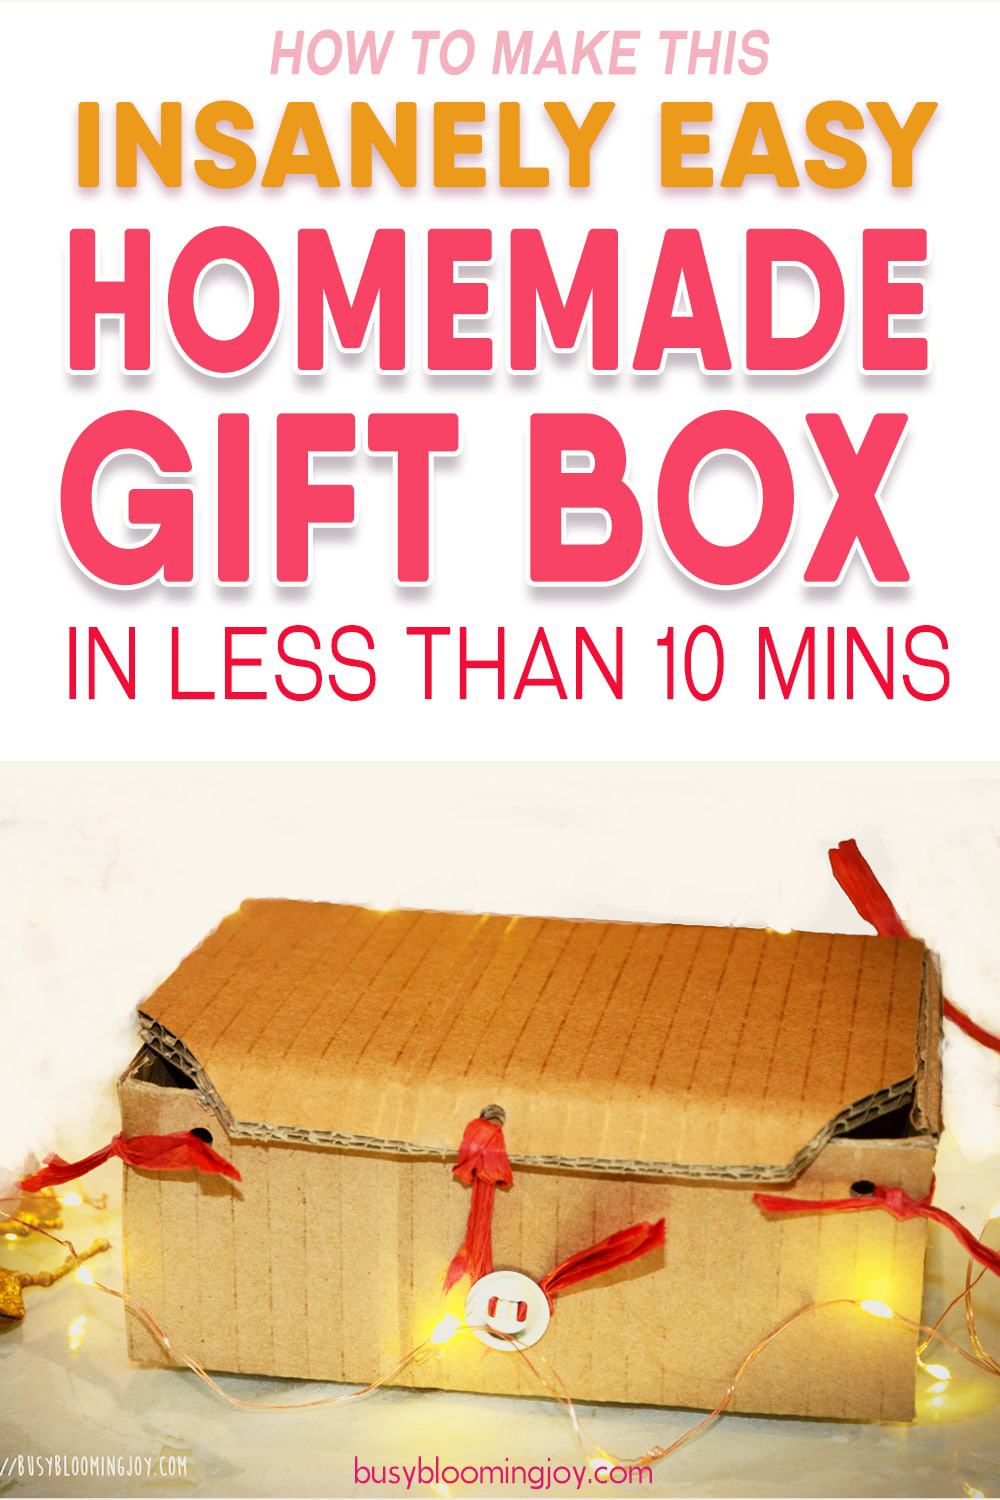 Insanely easy DIY gift box you can make in under 10 mins (even with toddlers!)